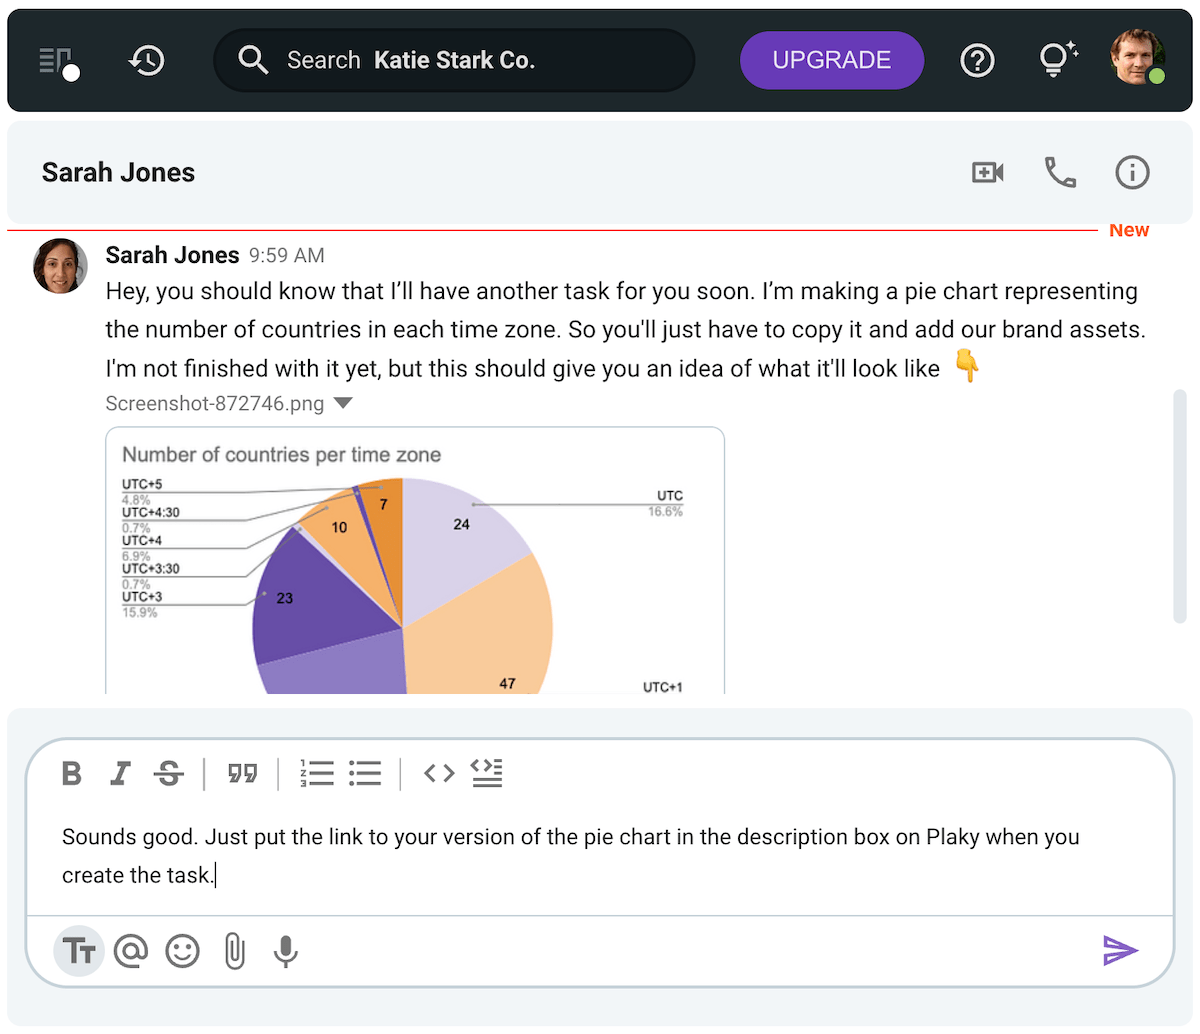 A blog writer requests a pie chart visual from the illustrator she’s working with and is, once again, referred to Plaky, the company’s project management software